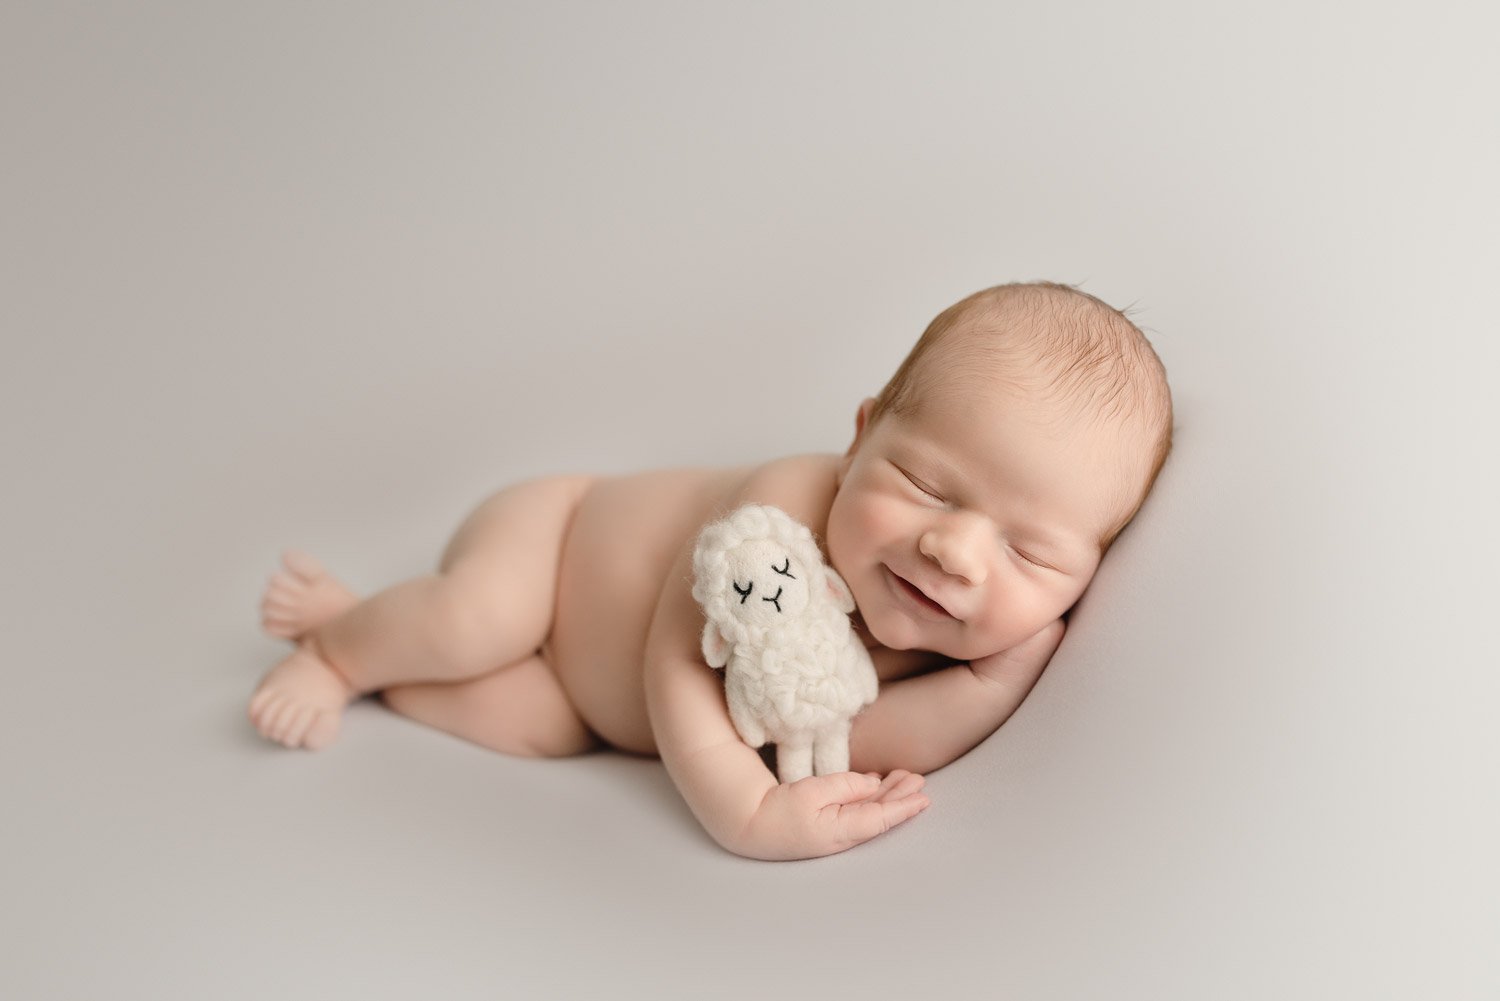 Vancouver Newborn Photography baby boy smiling sleeping while holding a toy sheep